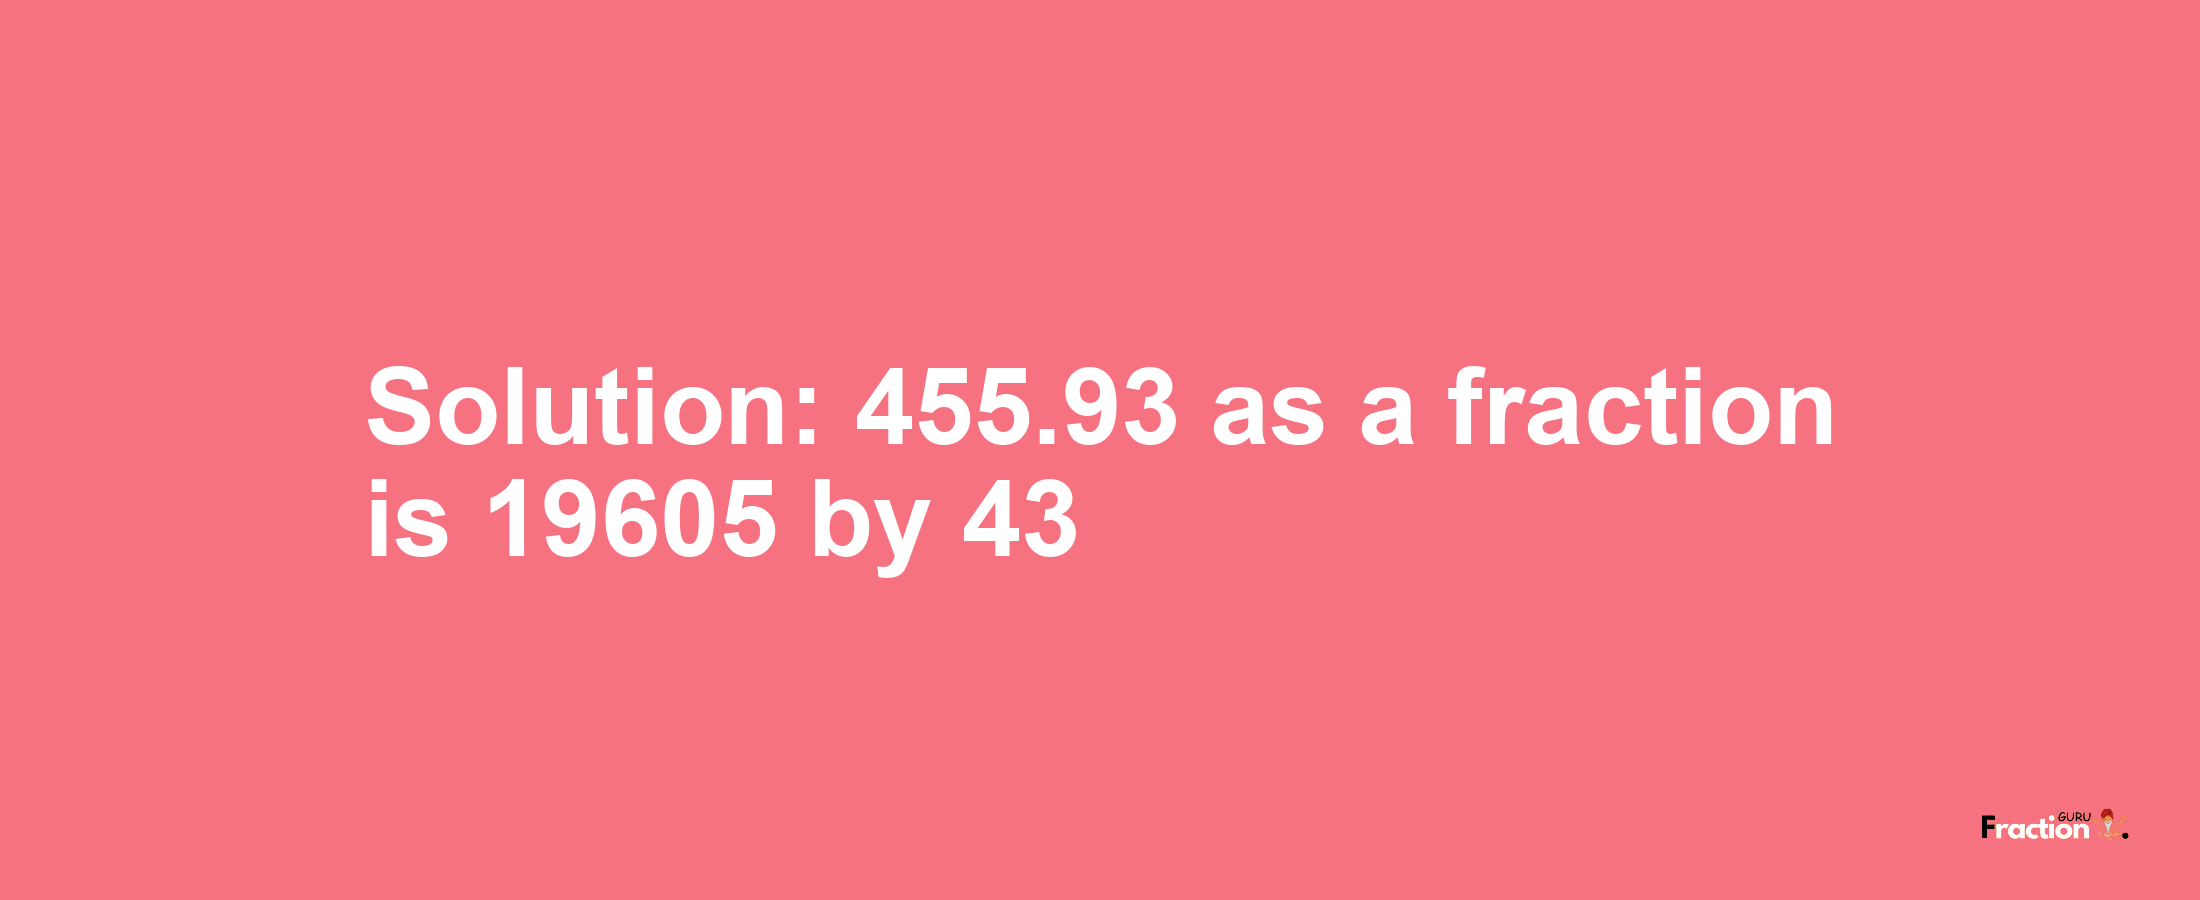 Solution:455.93 as a fraction is 19605/43